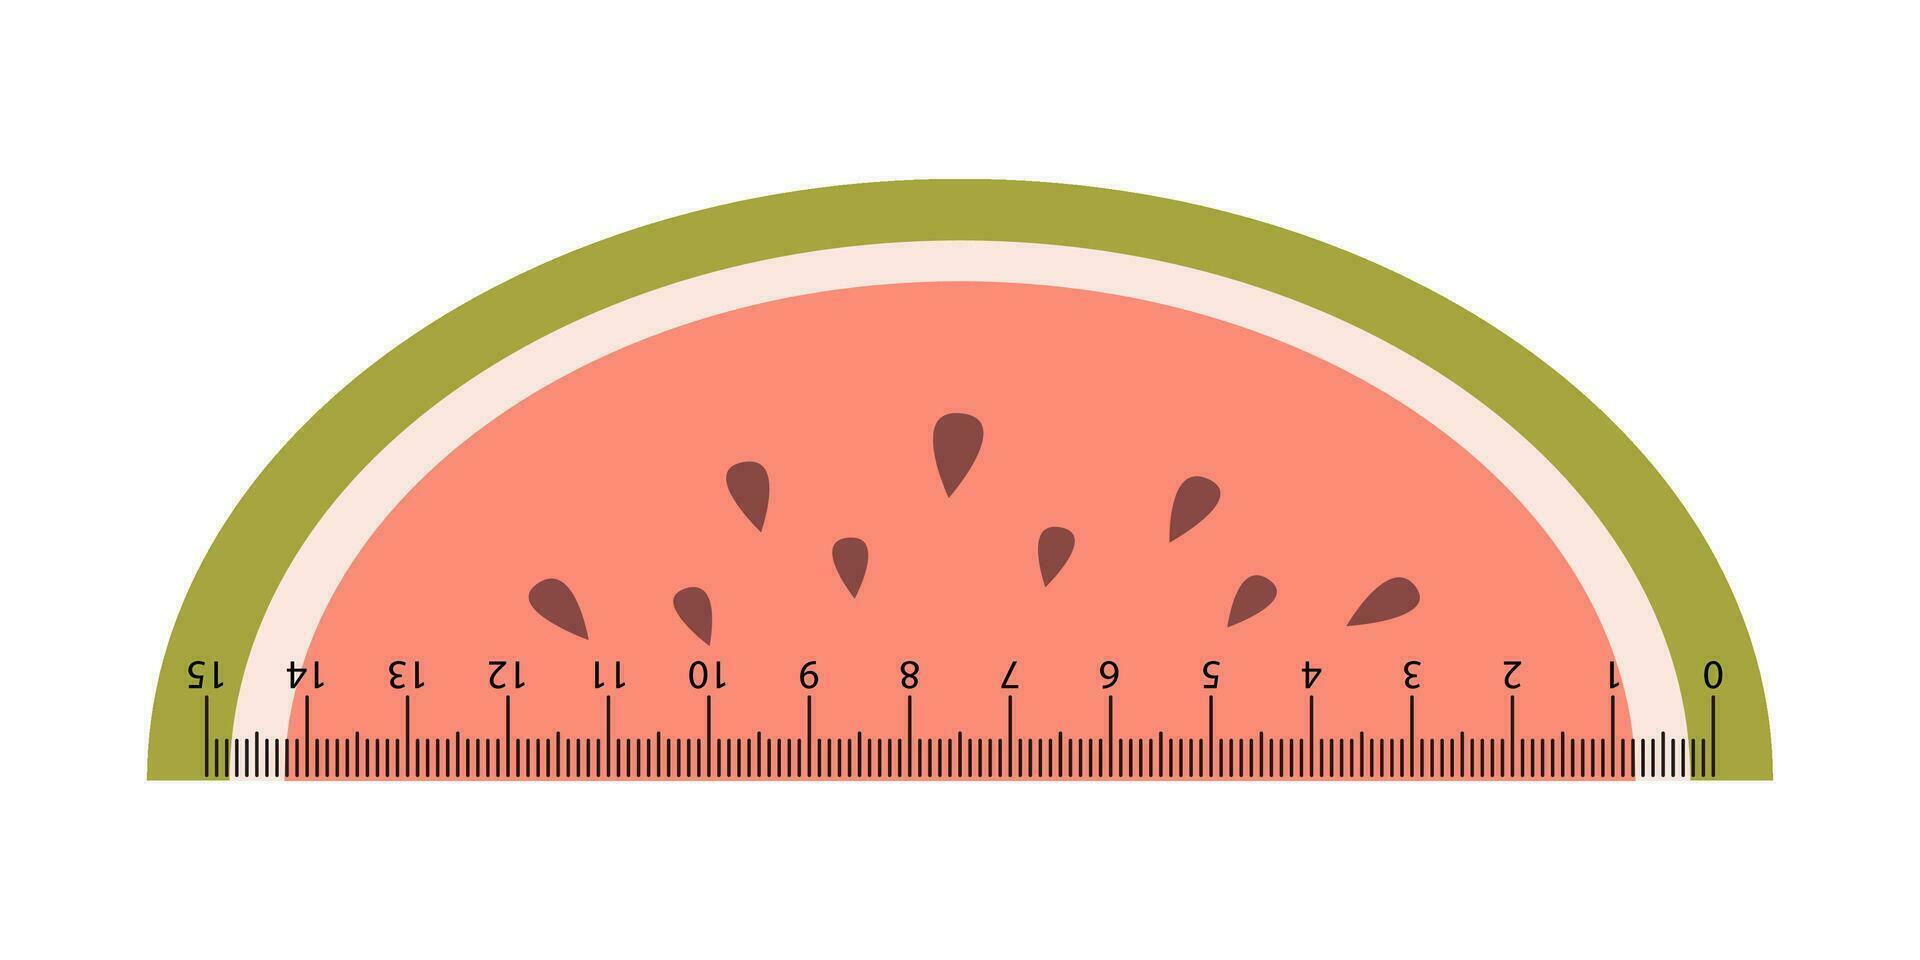 Vector cute measuring ruler. School ruler in the shape of watermelon slice. Fruit measuring tool. Student ruler with kawaii watermelon. Centimeter scales.